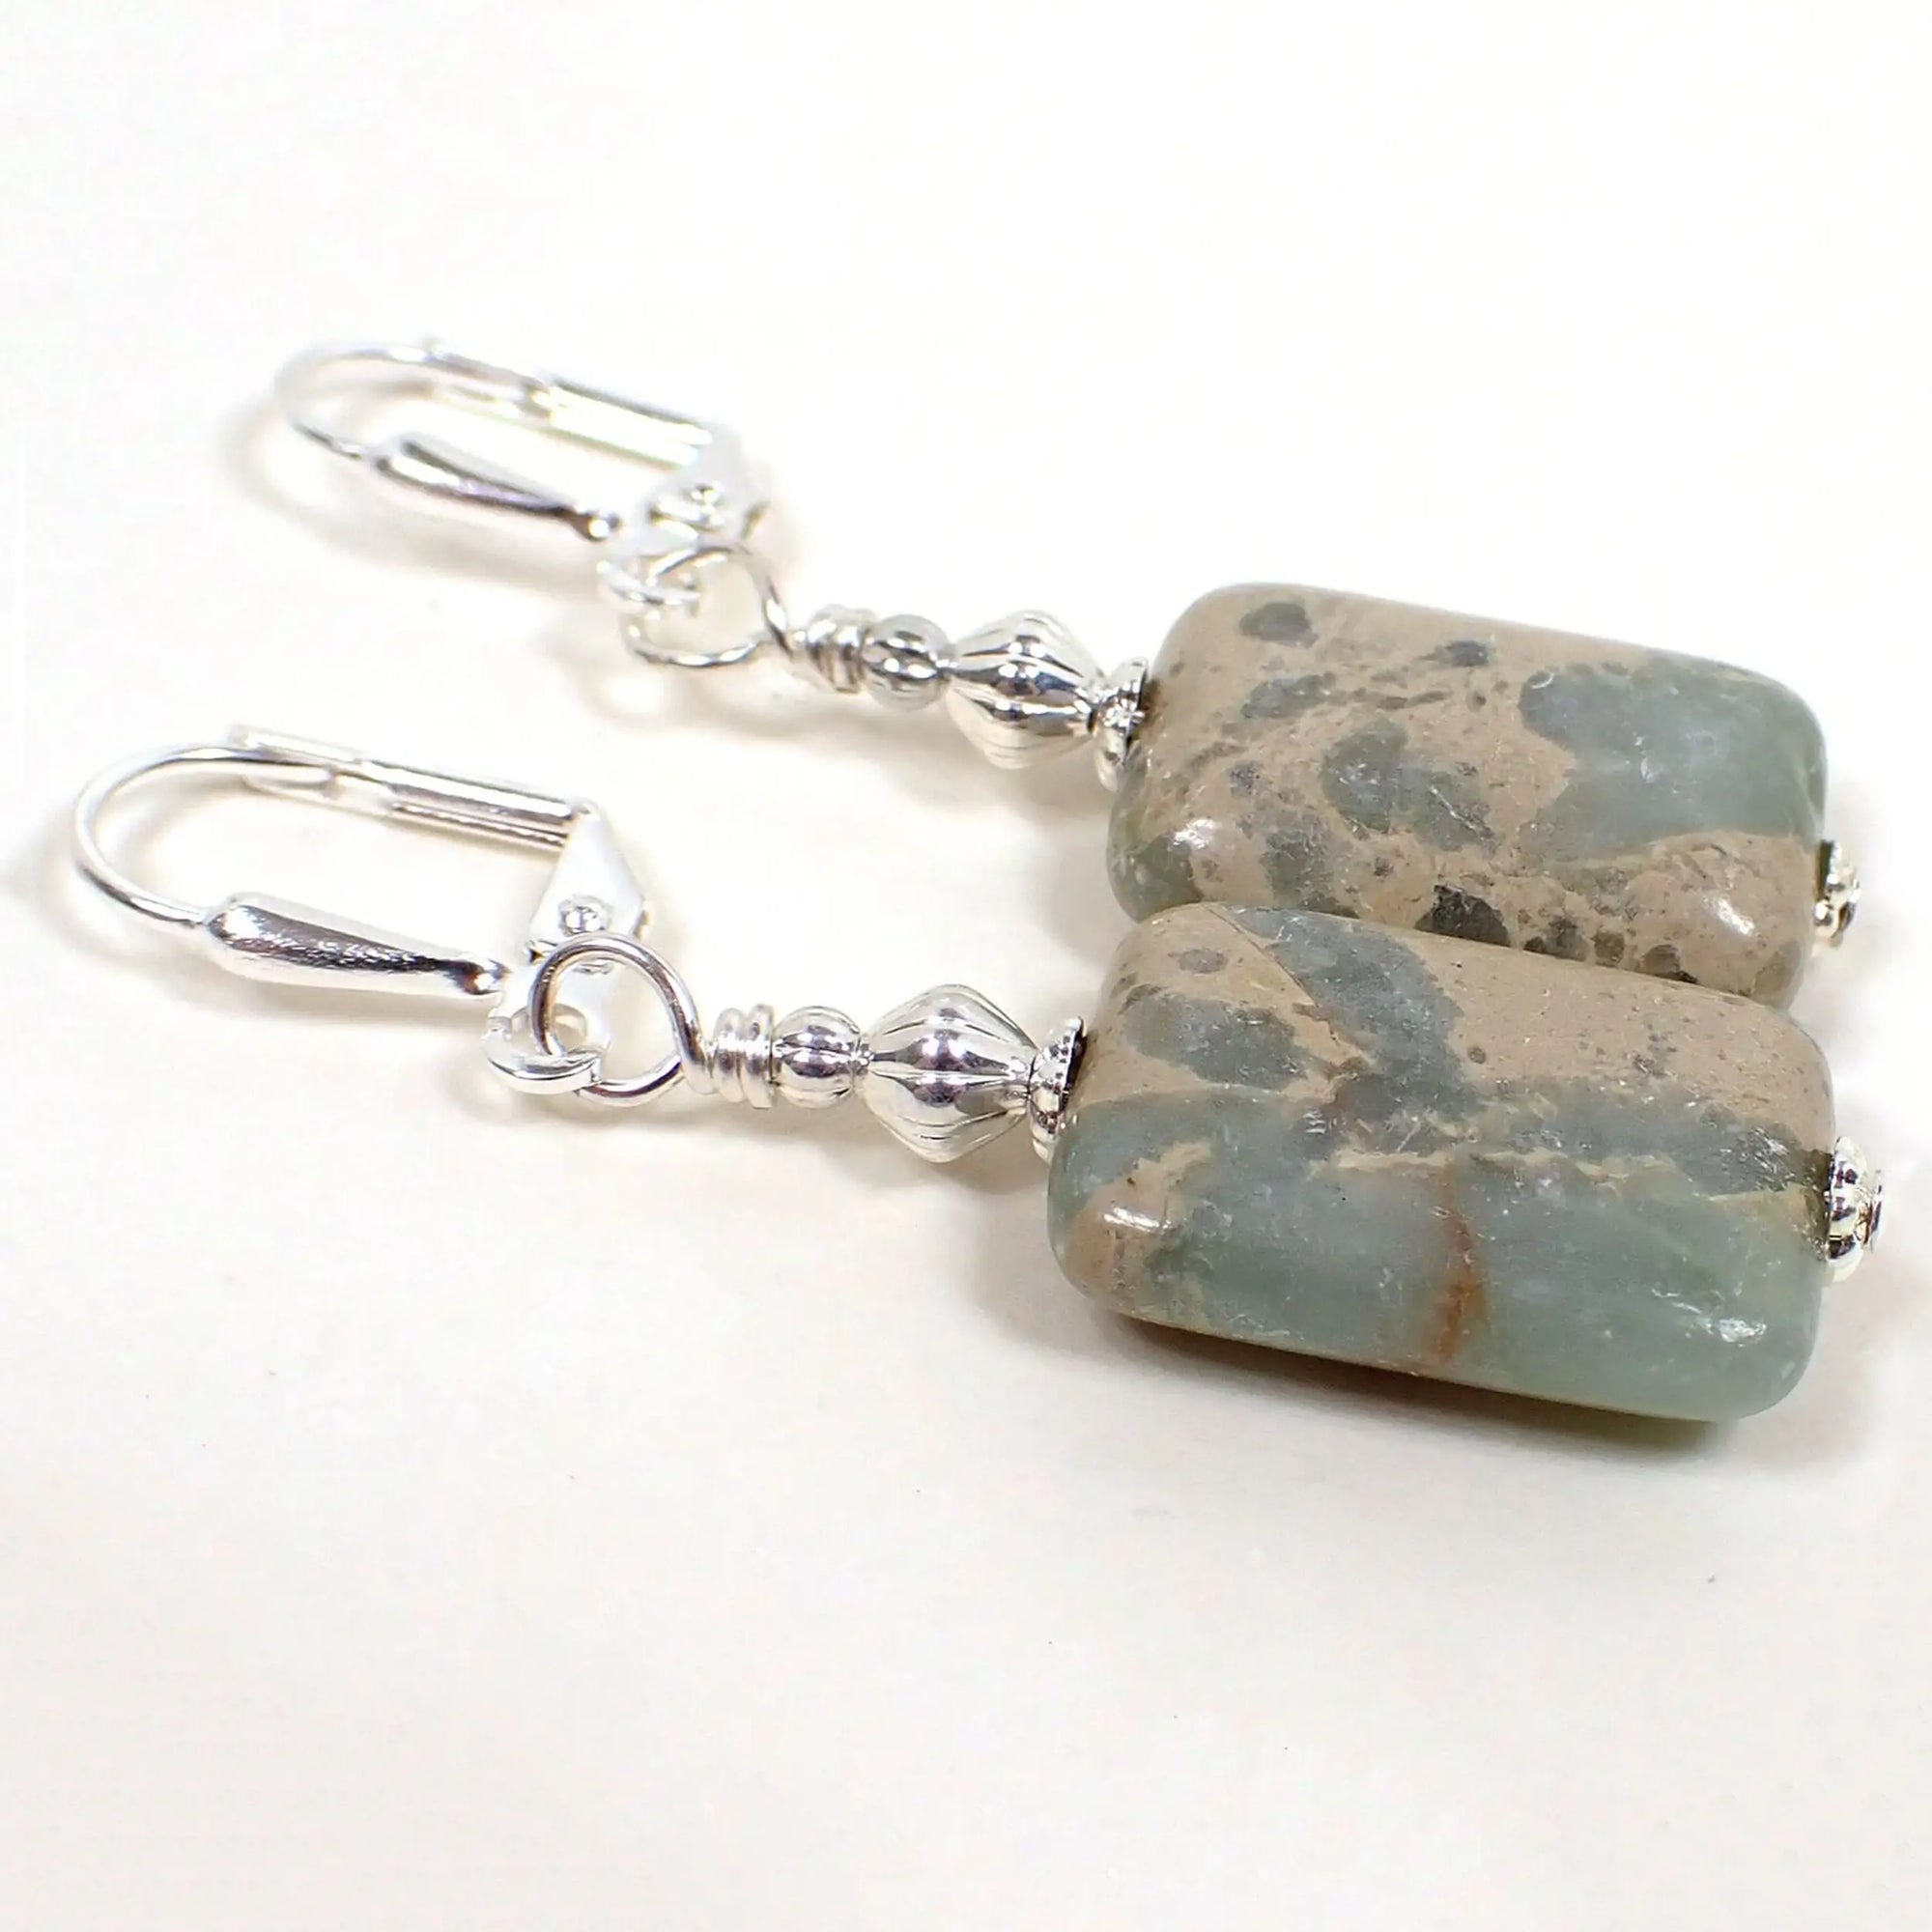 Angled view of the handmade gemstone earrings. The metal is silver plated in color. There are impression jasper beads at the bottom in a puffy rectangle shape. Impression jasper is manmade stone and has shades of light aqua blue marbled with shades of tan, cream, and may have a reddish line here or there.